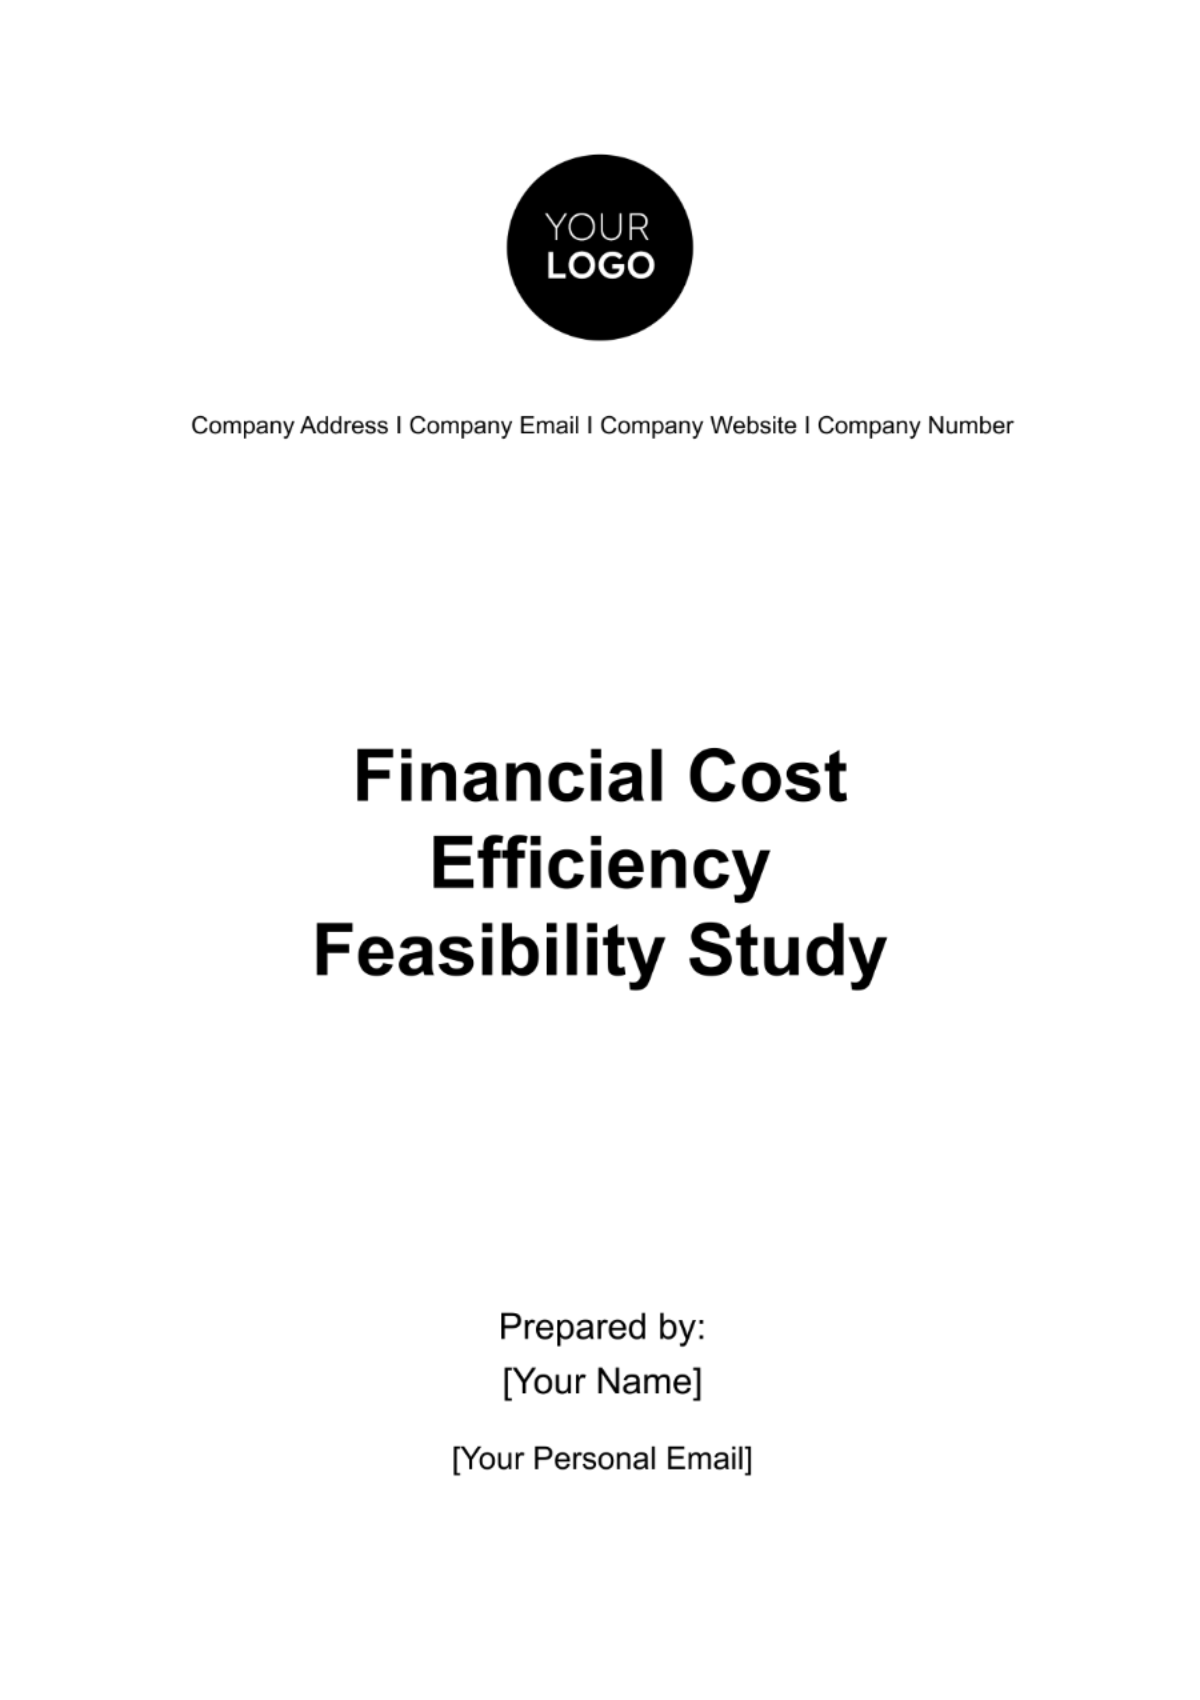 Free Financial Cost Efficiency Feasibility Study Template